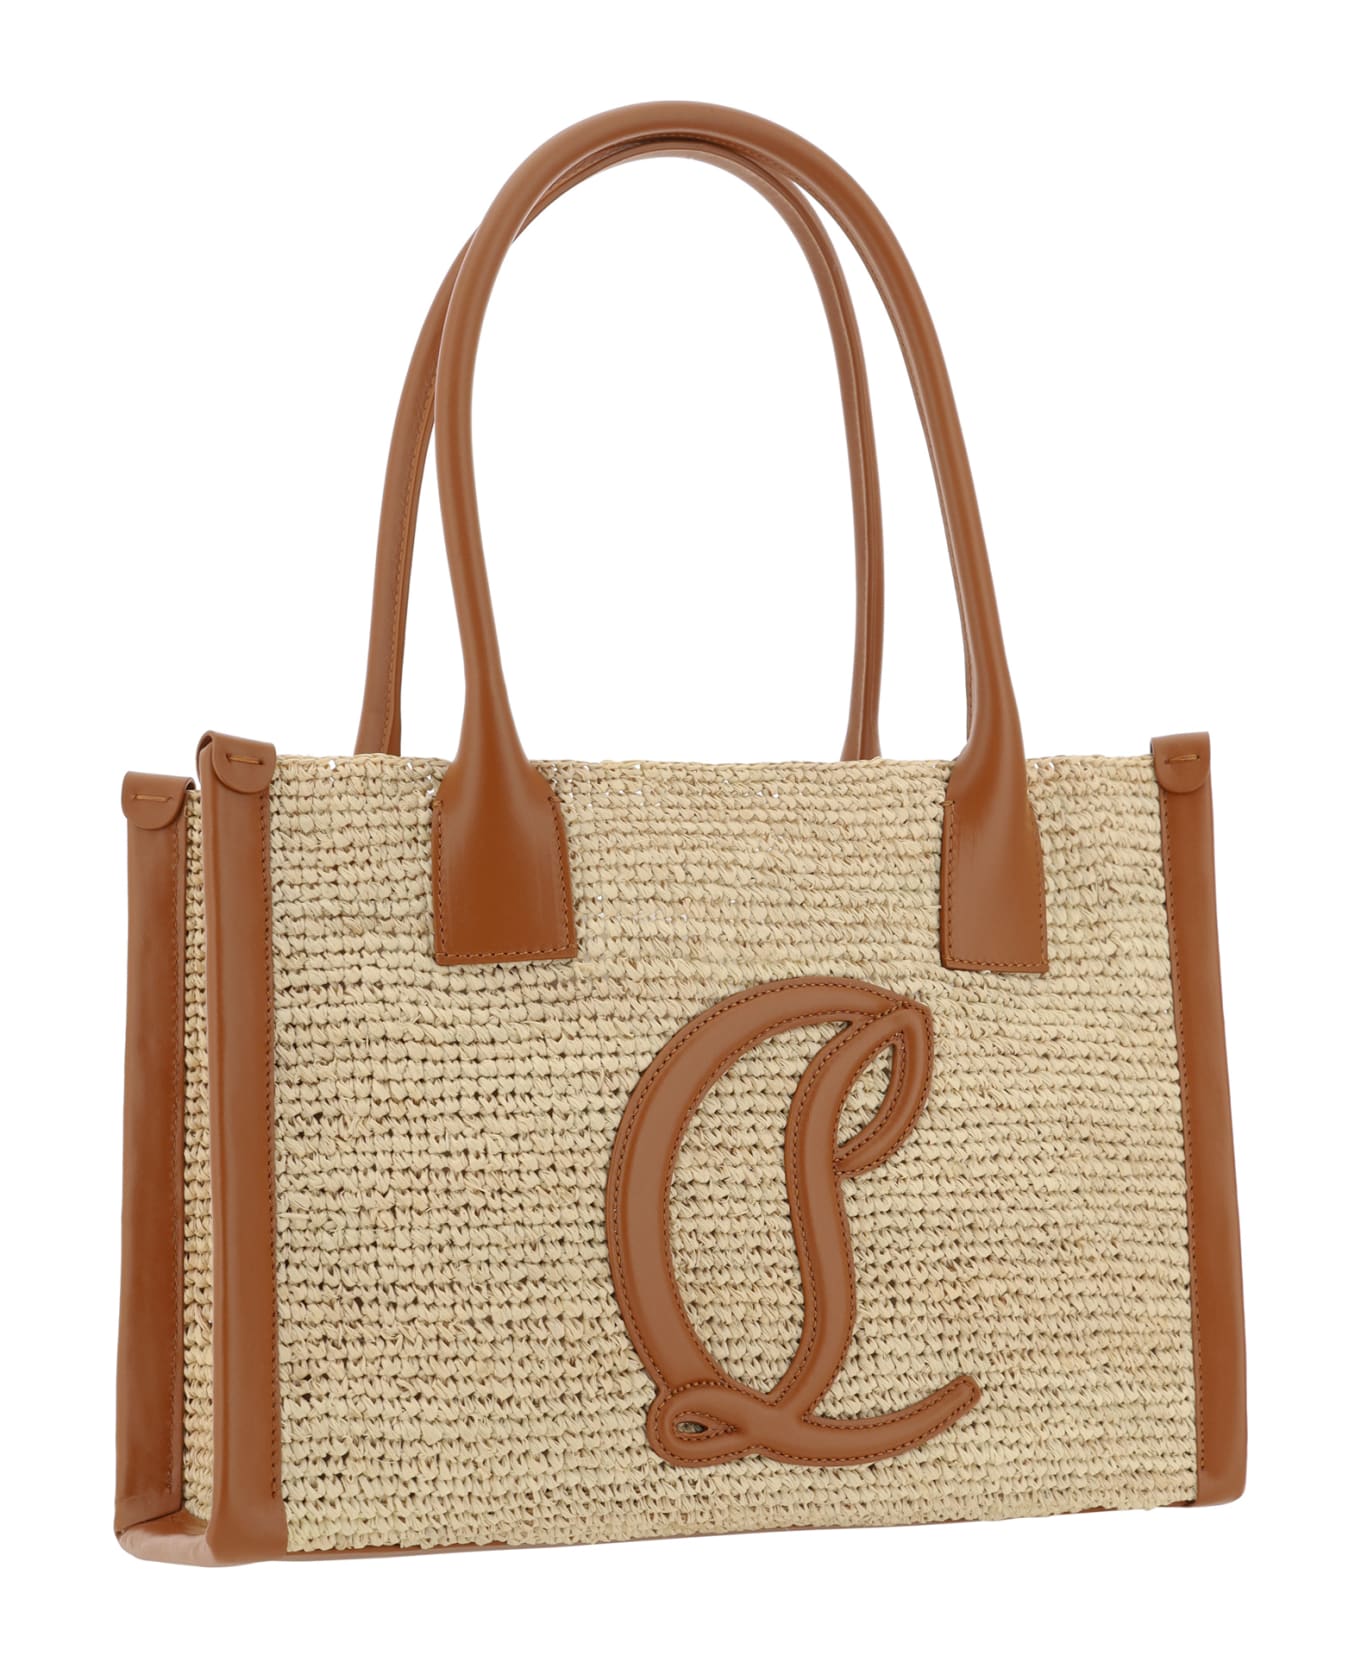 Christian Louboutin By My Side Small Handbag - Natural/cuoio